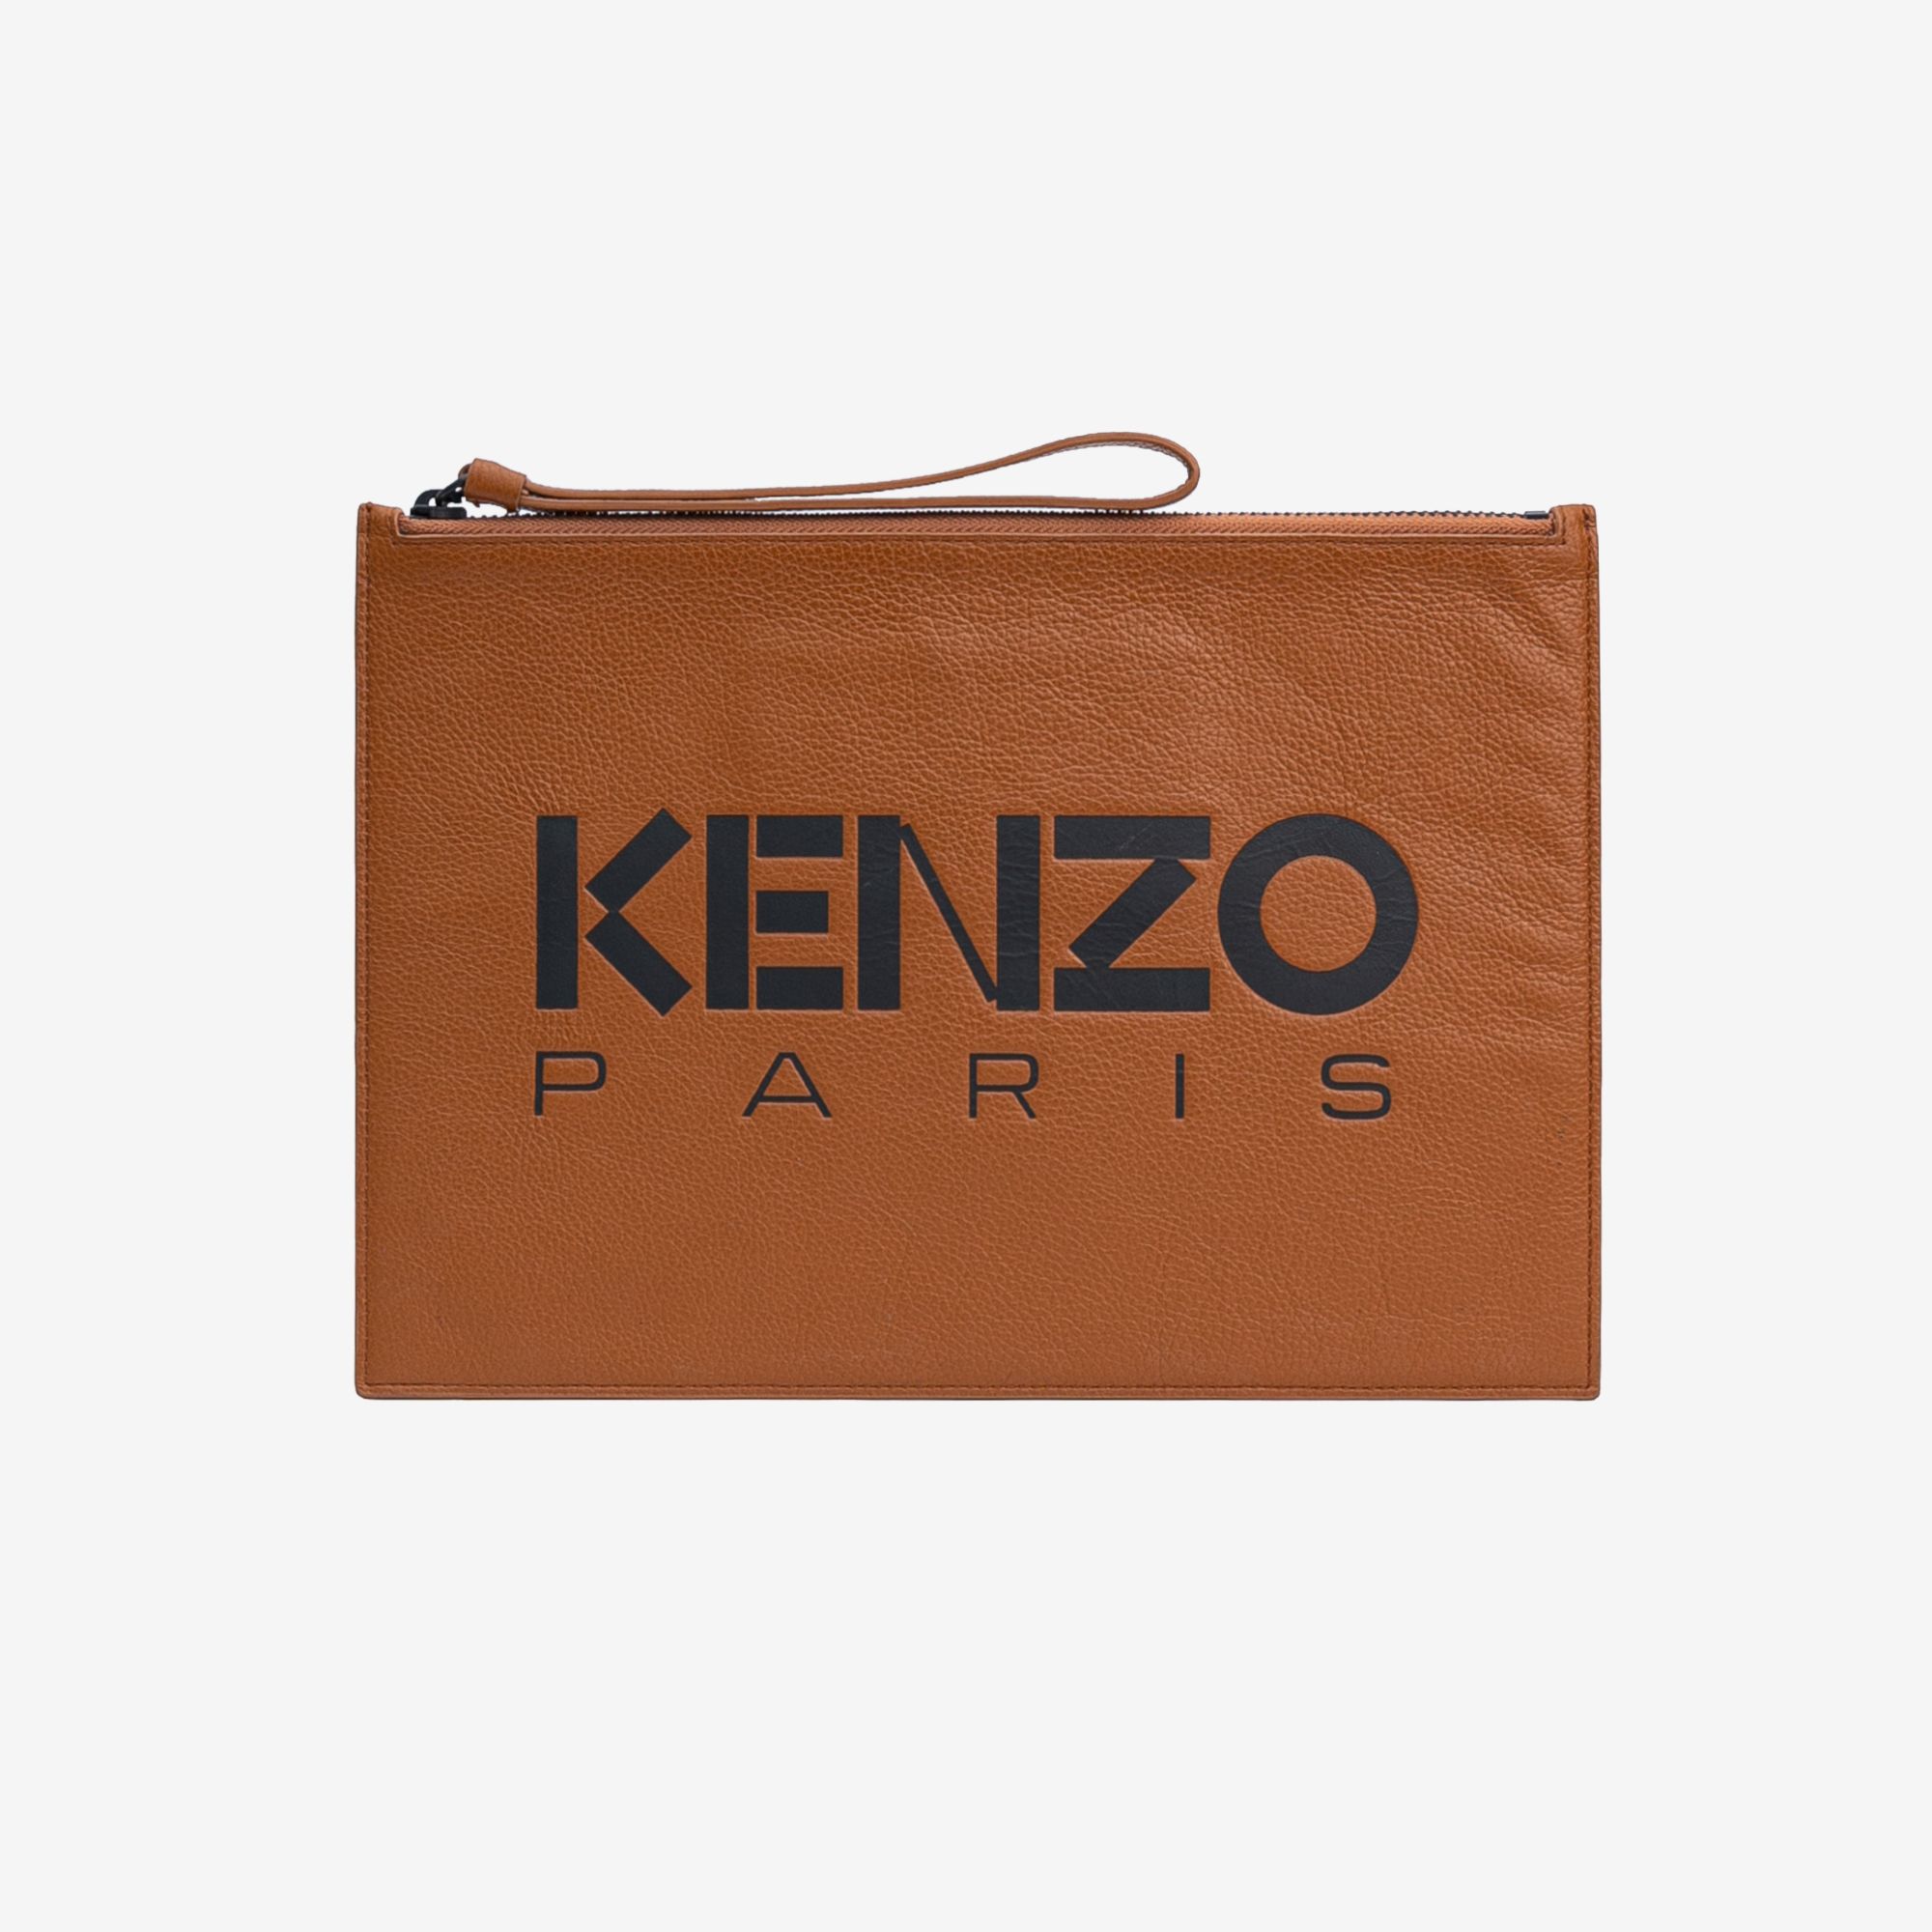  KENZO Logo Large Leather Clutch - Brown 